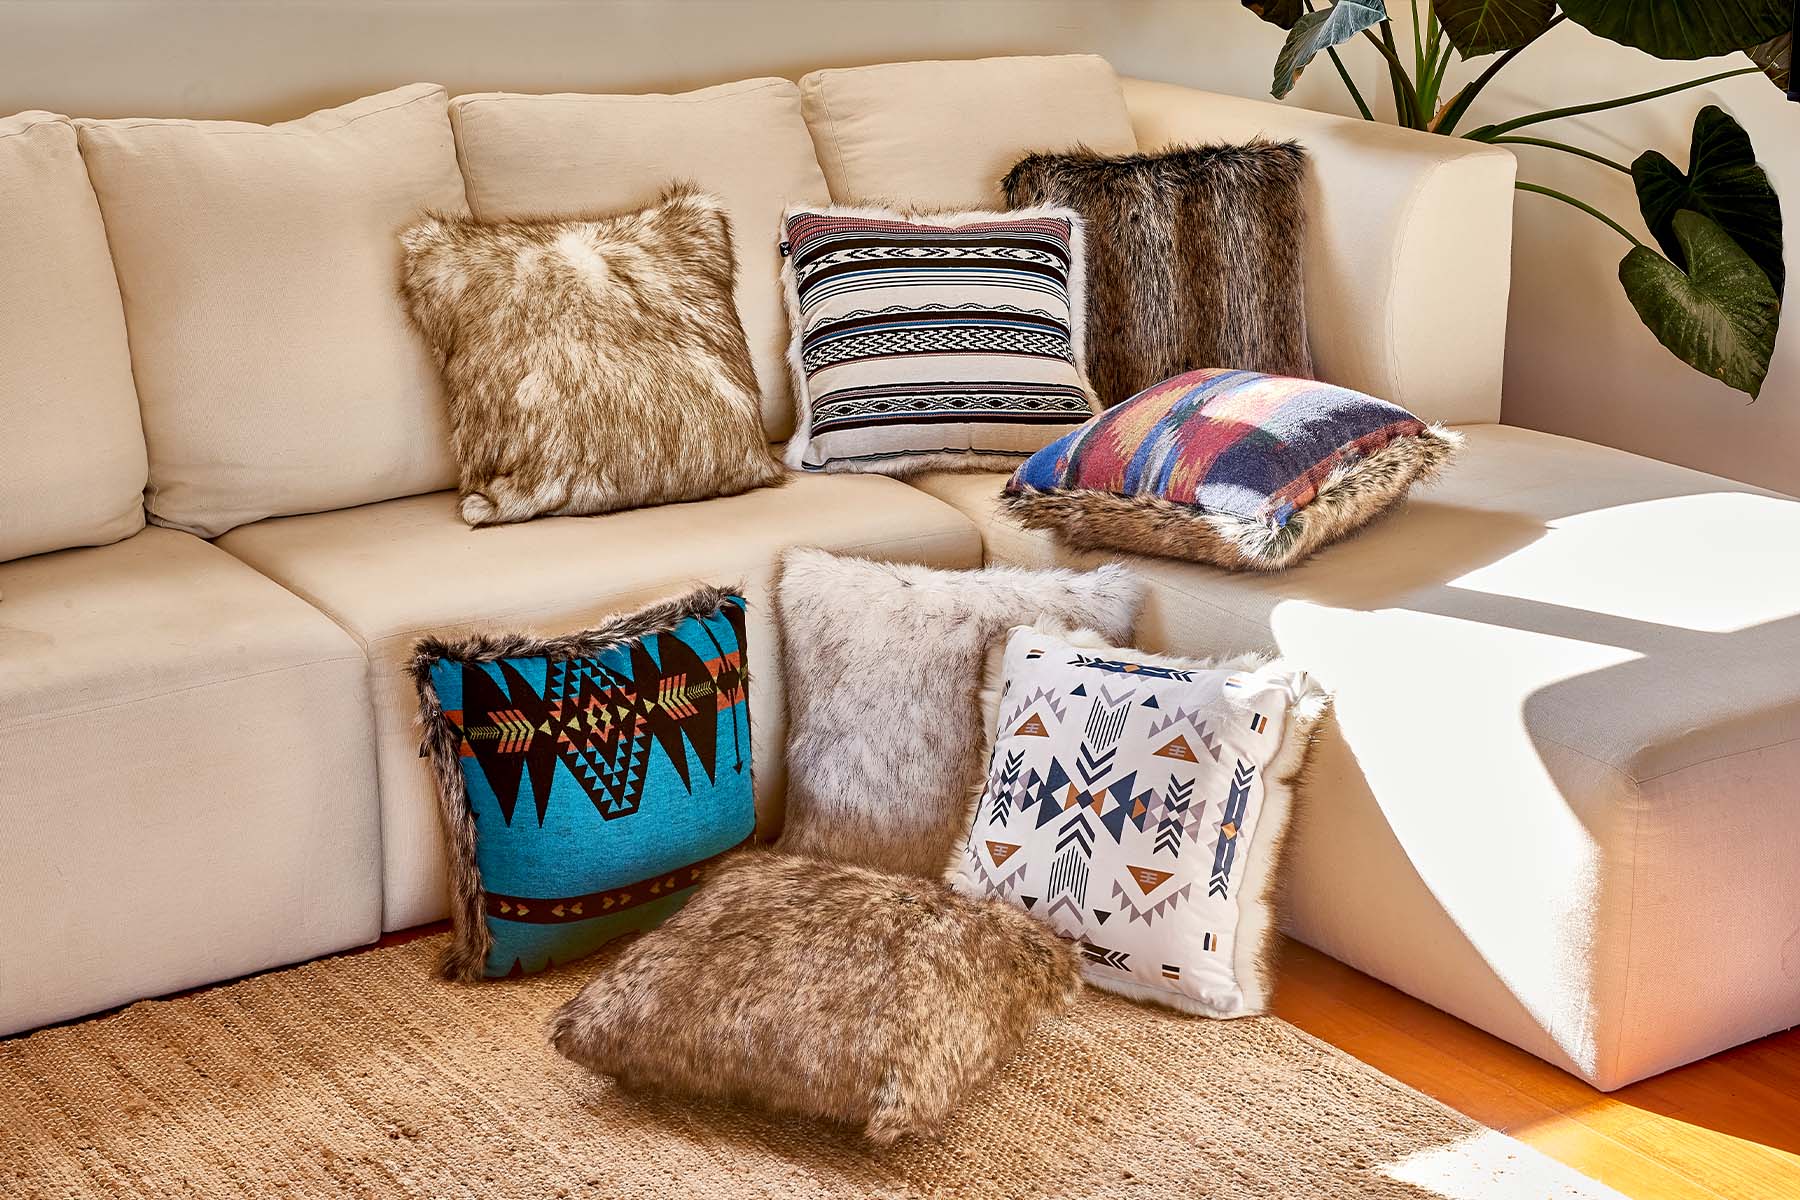 faux fur throw pillows on and around creme colored couch